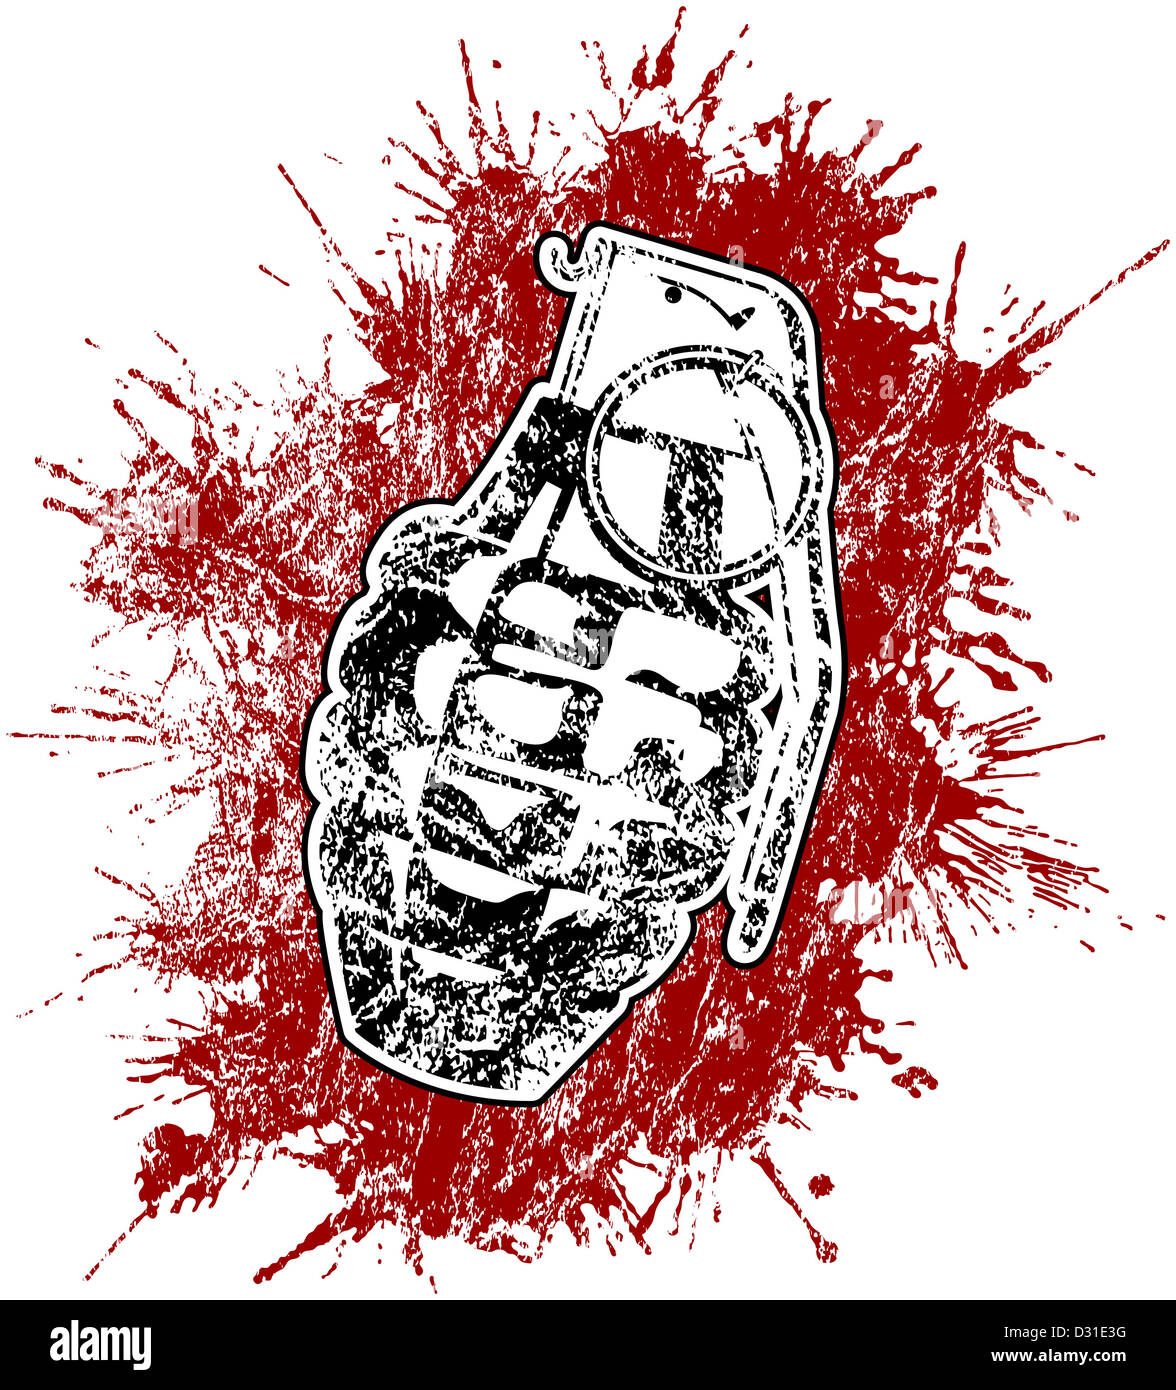 Grenade with splattered blood Stock Photo